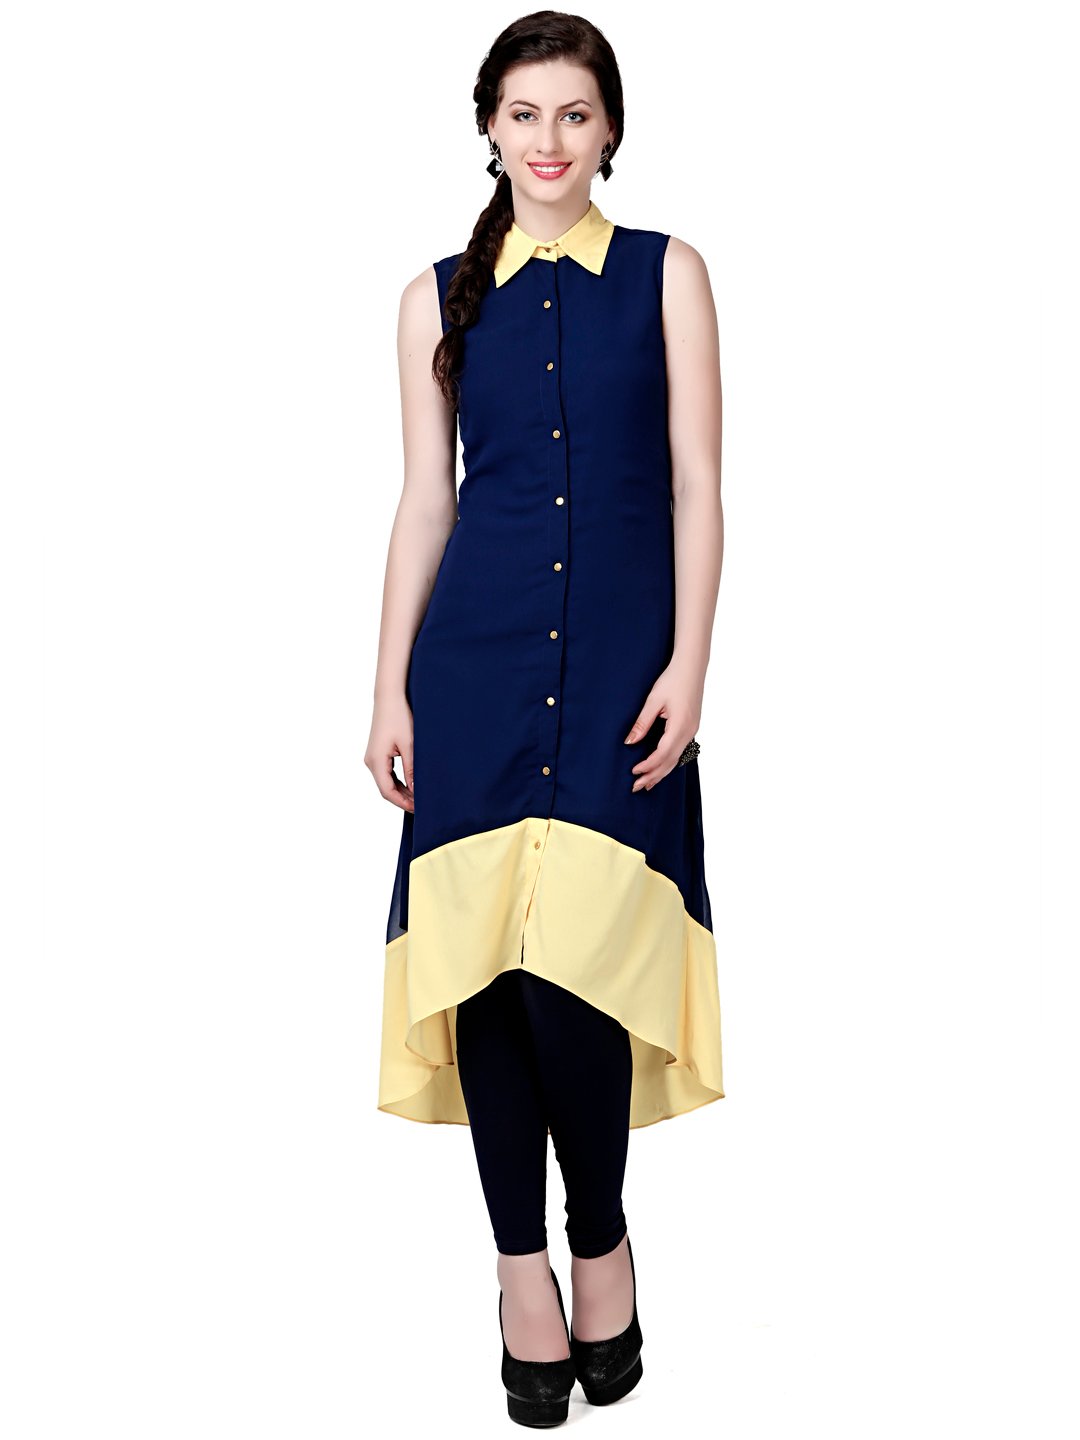 Very Stylish High Low Frock Design|High Low Kurti Designs|Tail Frock Design|High  Low Designer Dress| | High low kurti designs, Kurta neck design, Frock  design